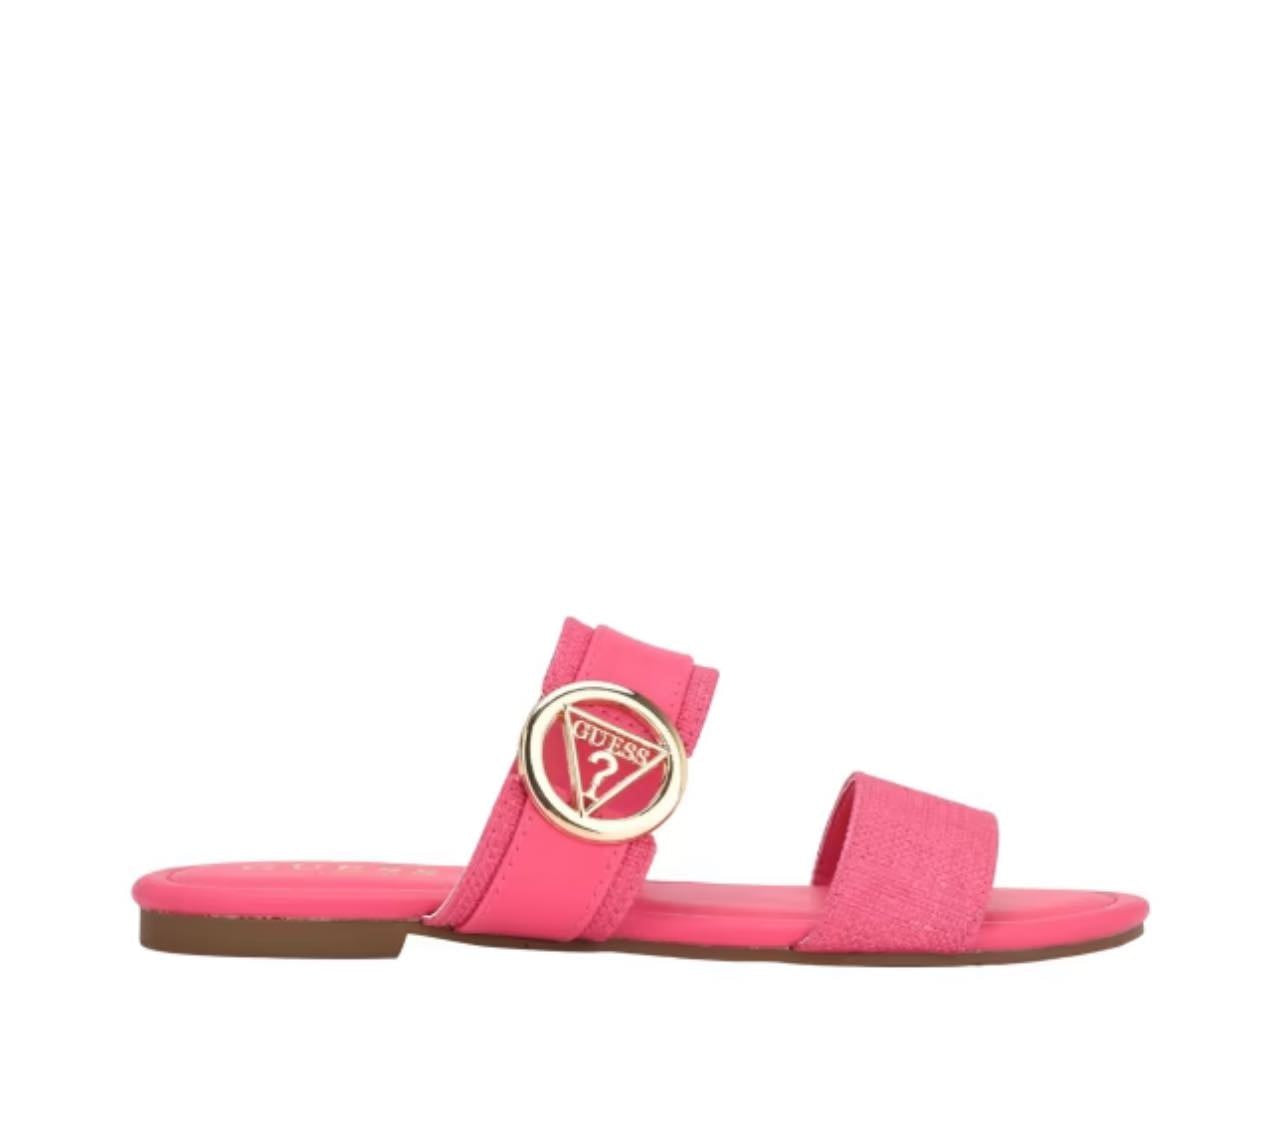 Guess Lowered Double Band Slide Sandals- Light Pink (UK 7)